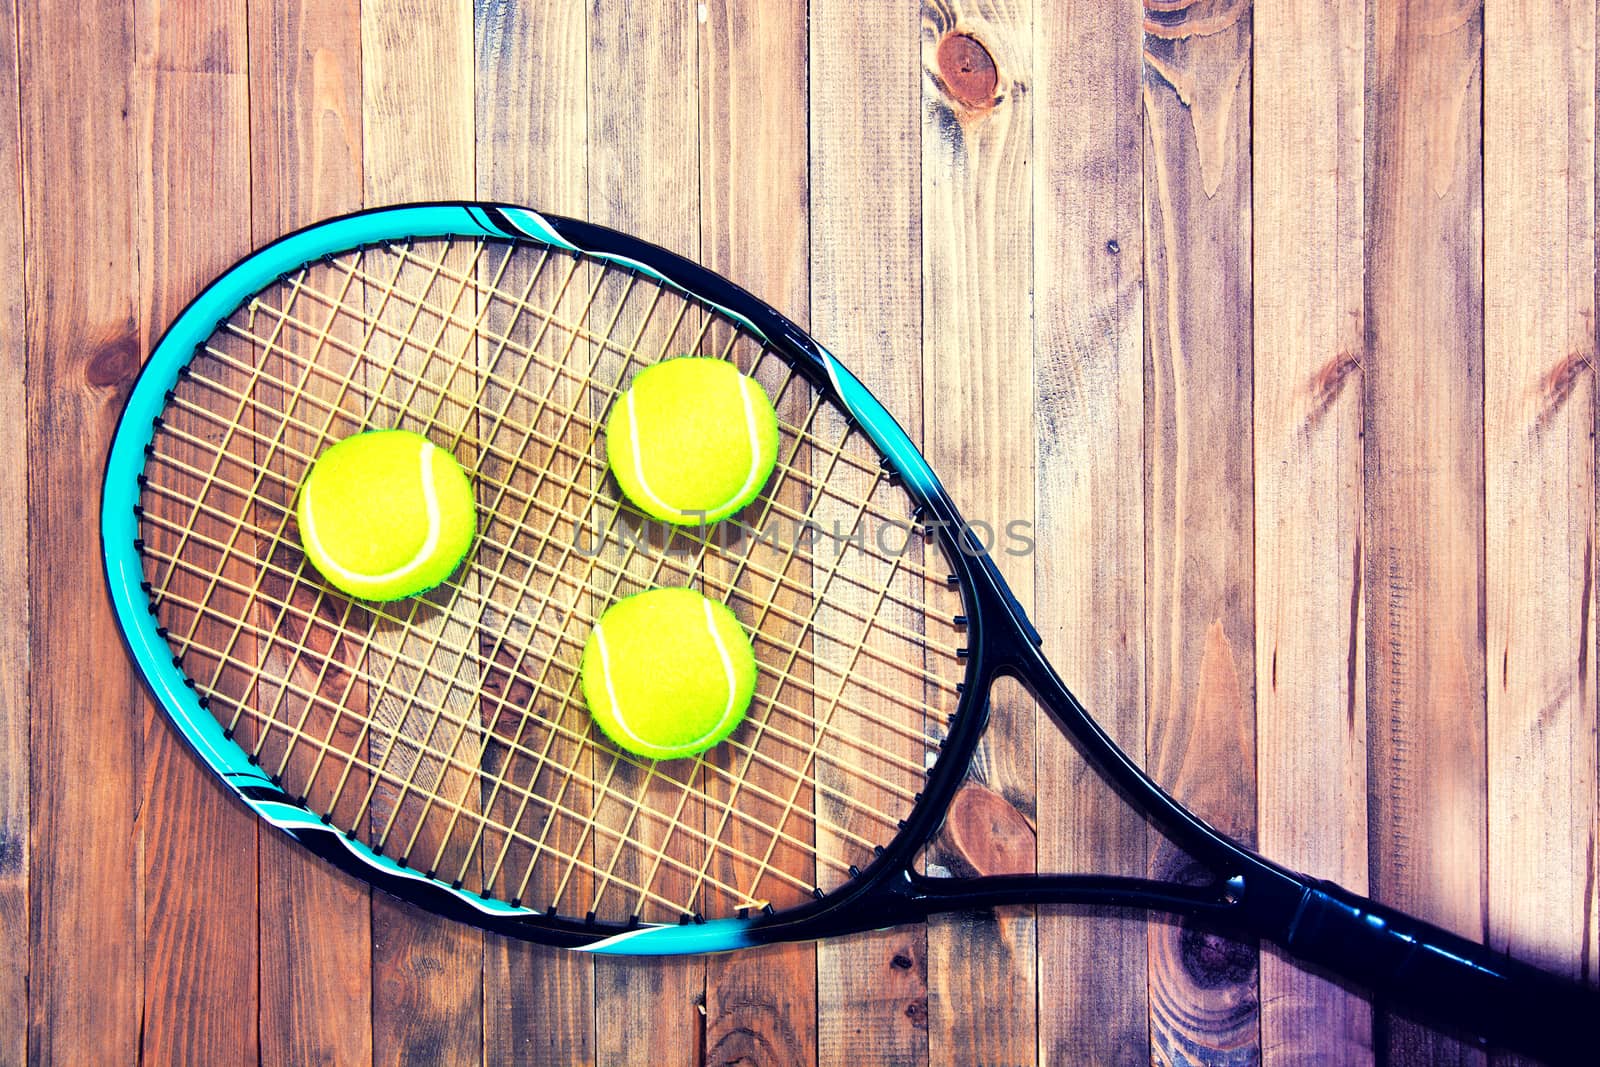 Tennis game. Tennis ball on wooden background. Vintage retro picture.